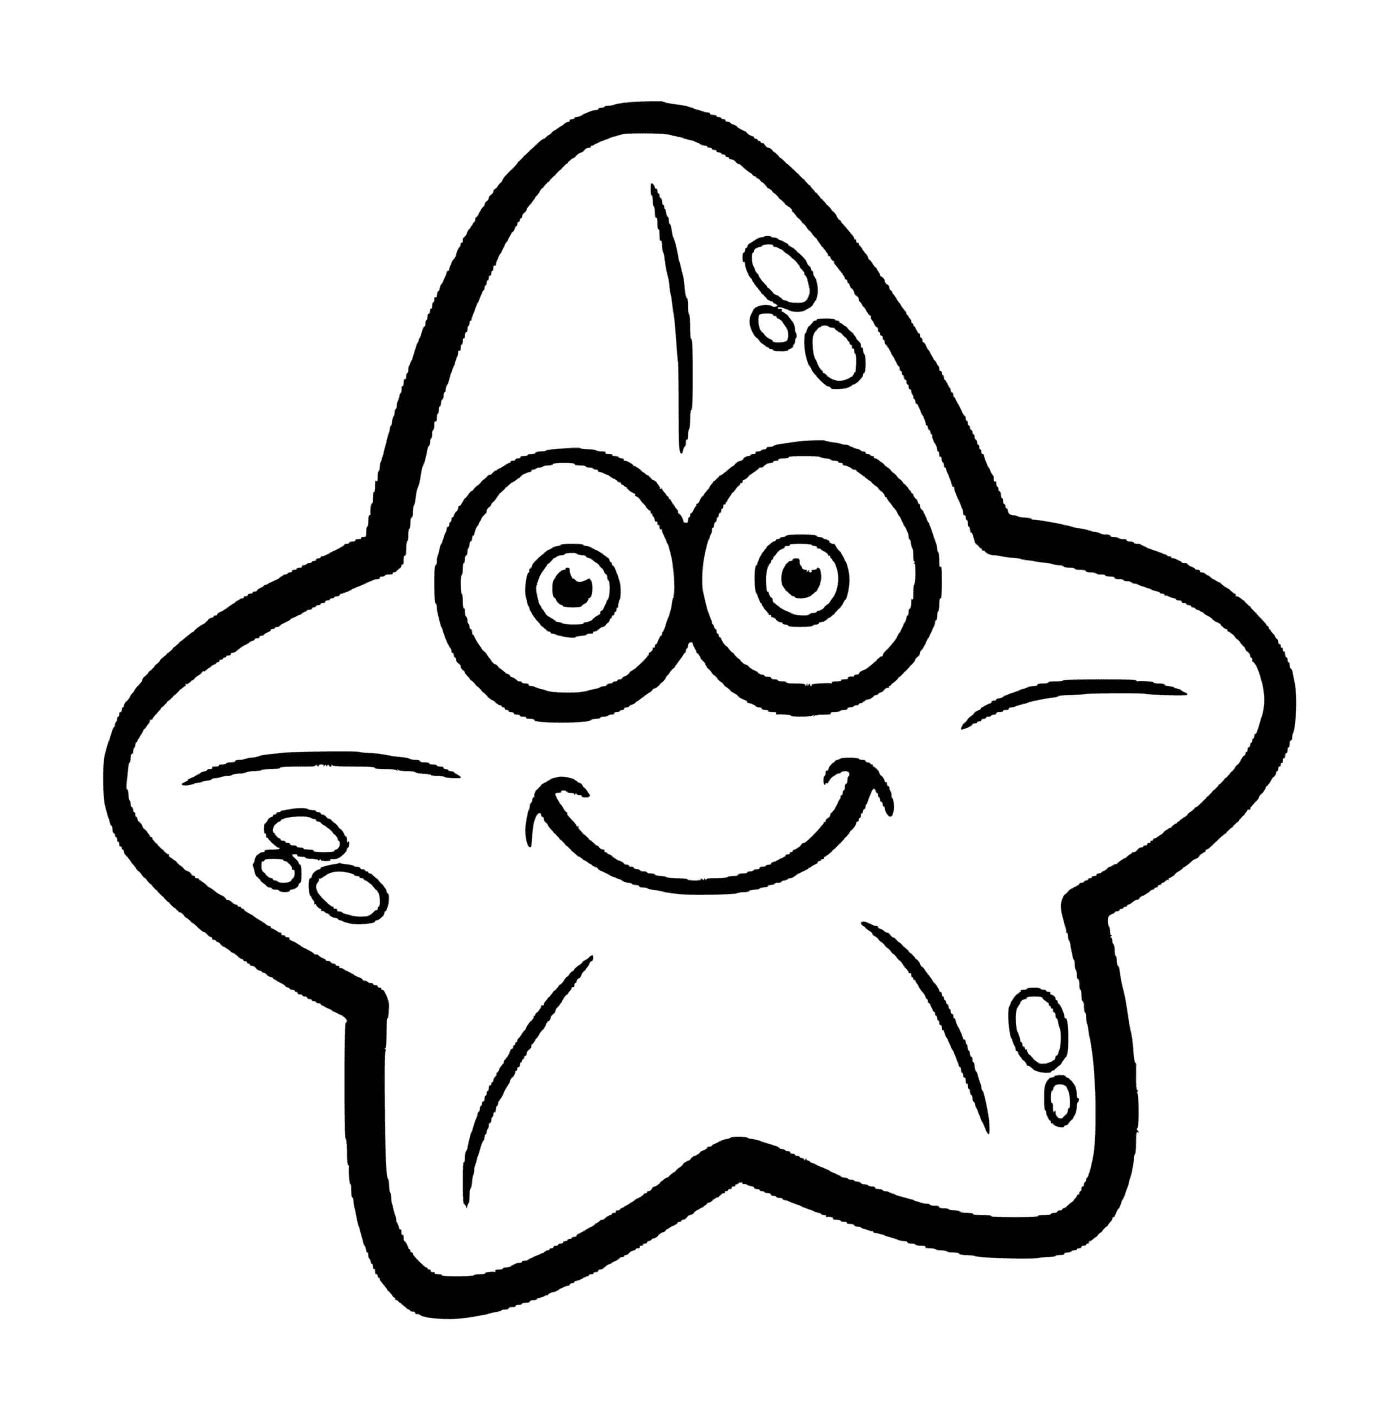  A smiling star of the sea for children 